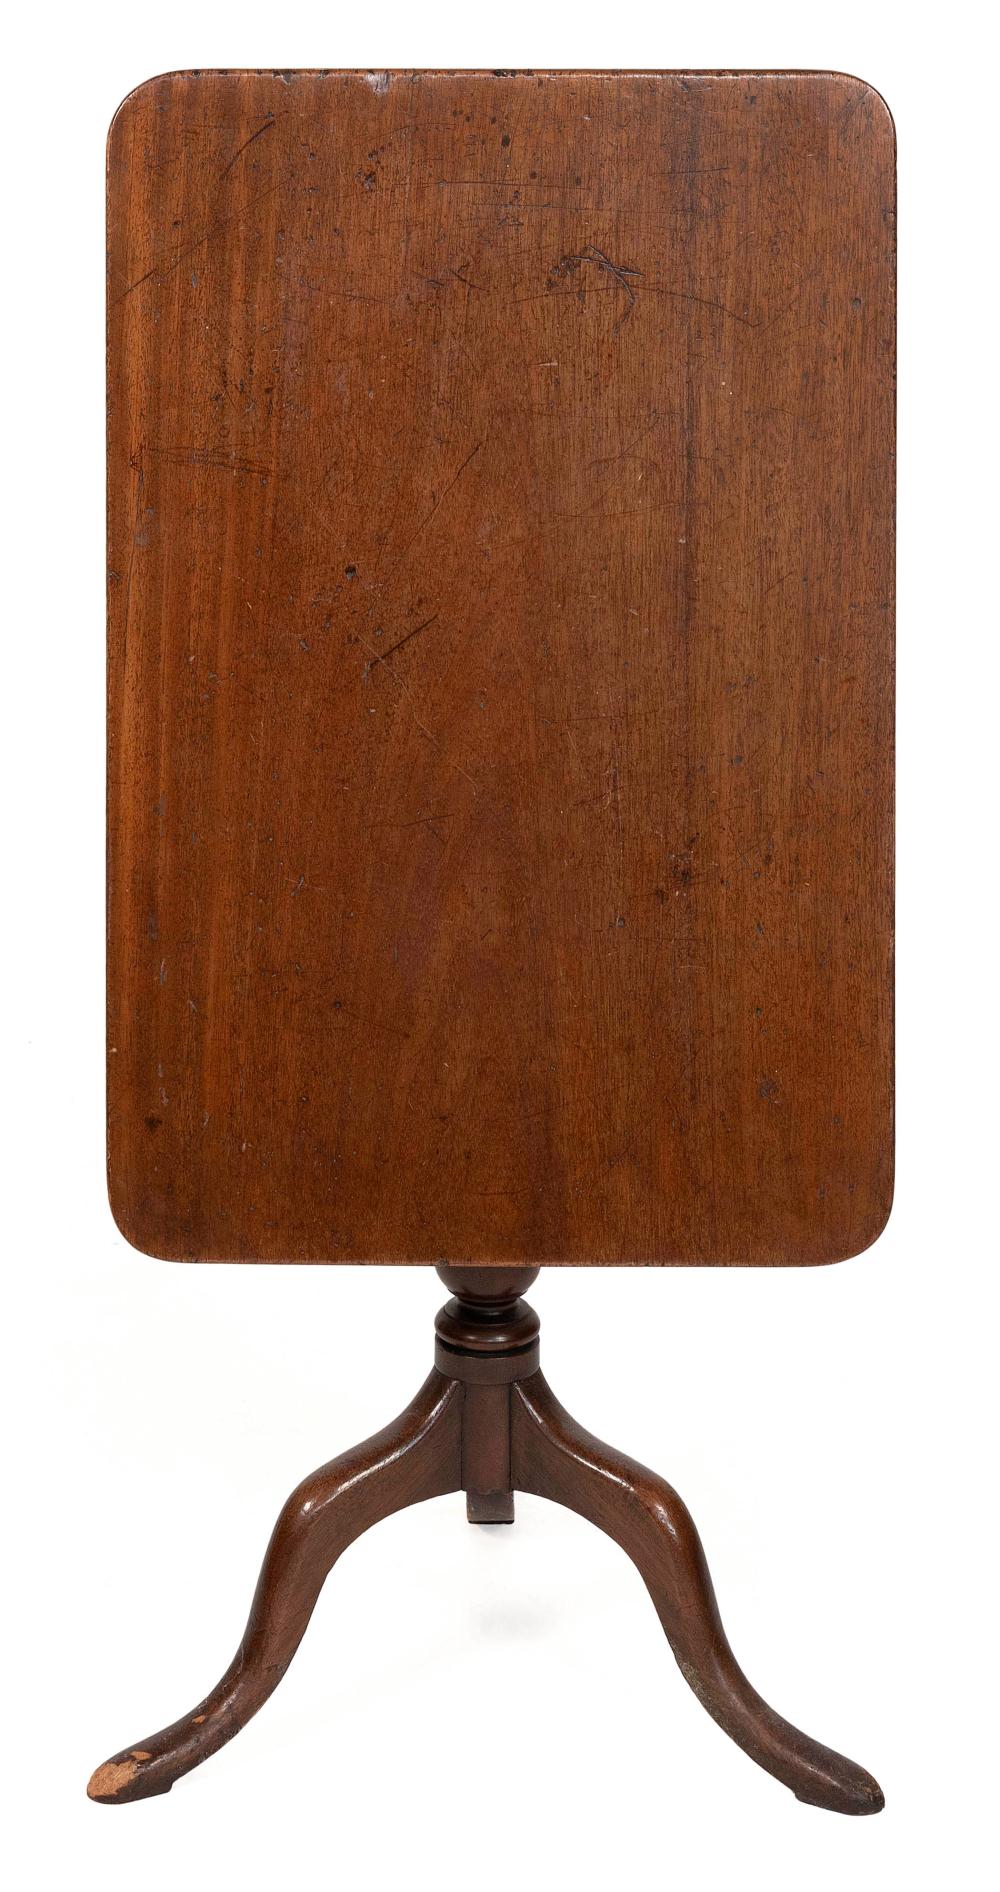 FEDERAL TILT TOP STAND EARLY 19TH 2f0eca